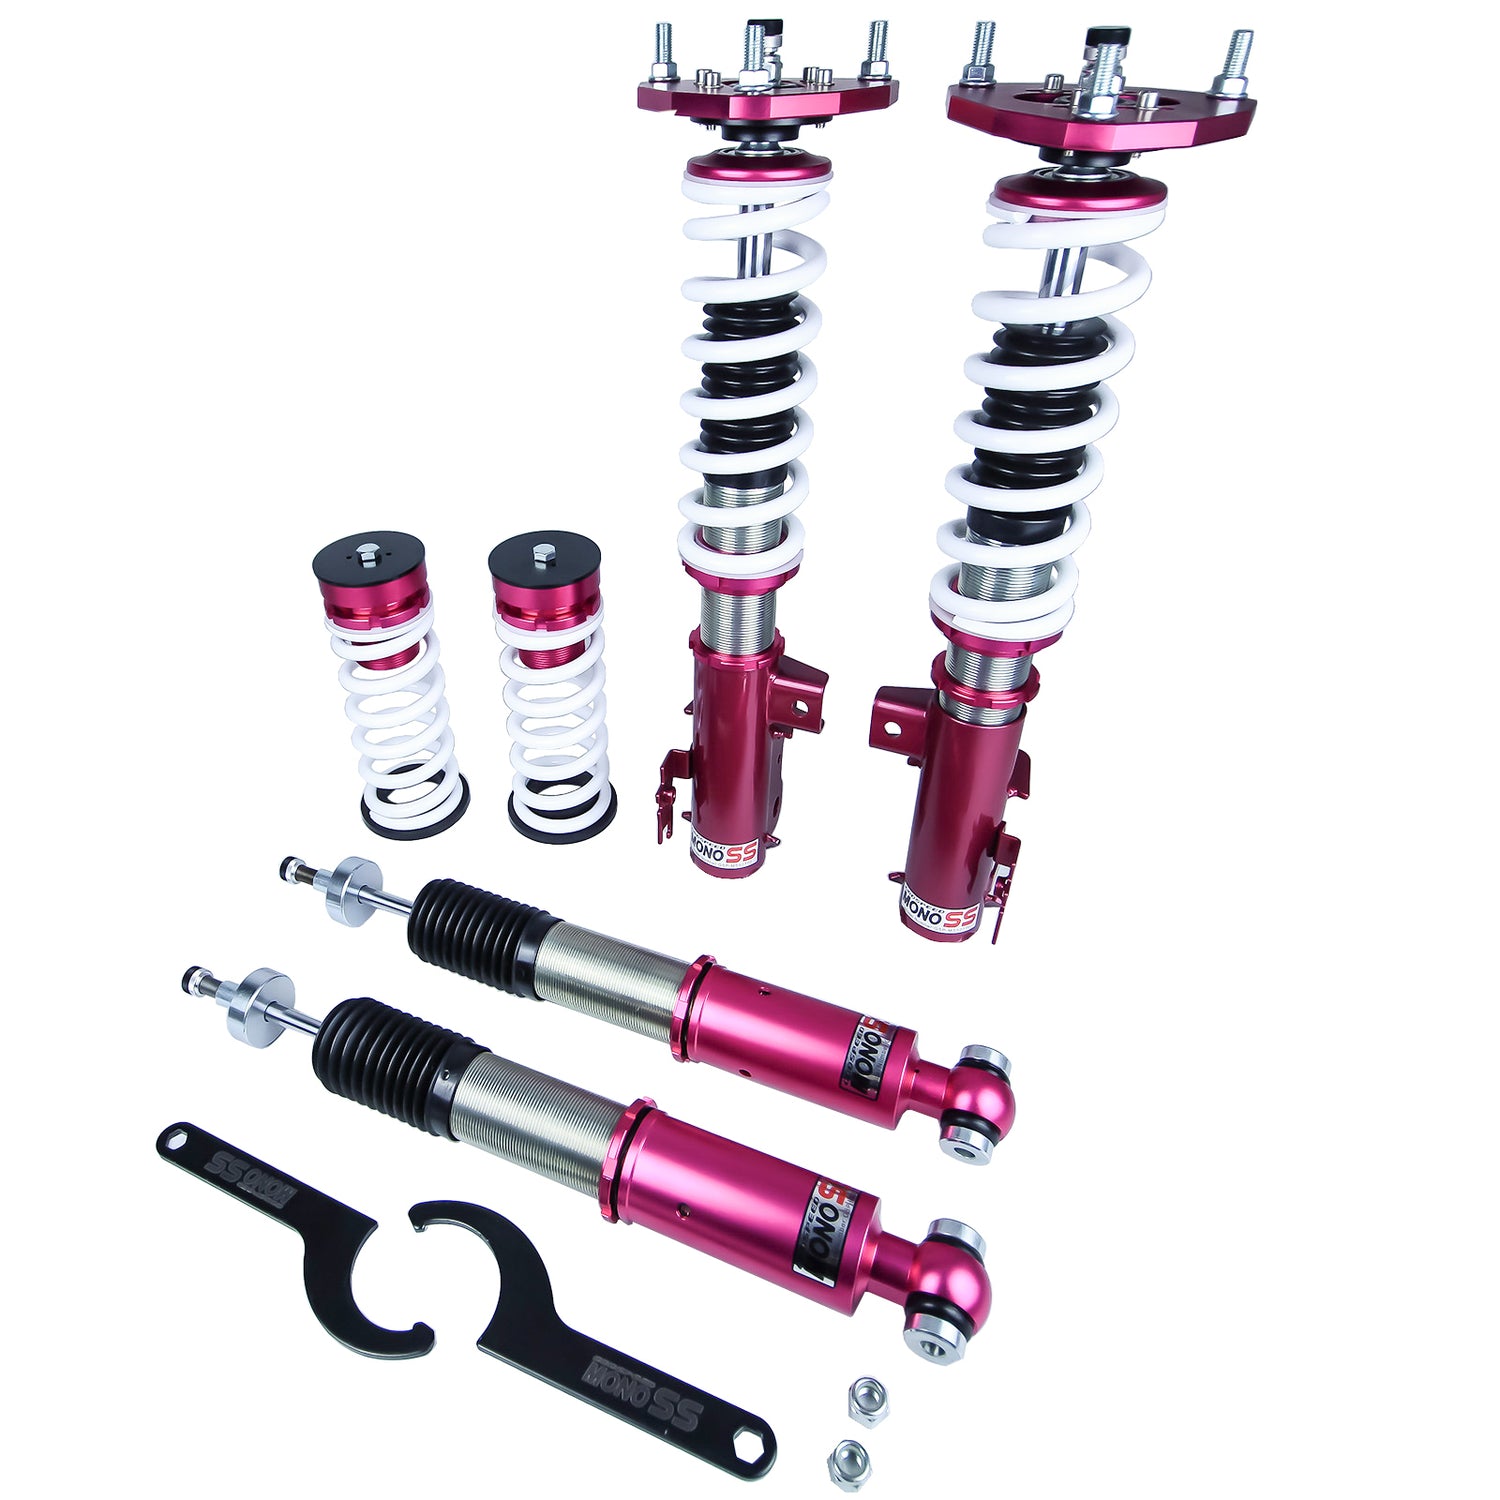 Godspeed MSS0770 MonoSS Coilover Lowering Kit, Fully Adjustable, Ride Height, Spring Tension And 16 Click Damping, Lexus CT200h(CT/CR) 2011-17